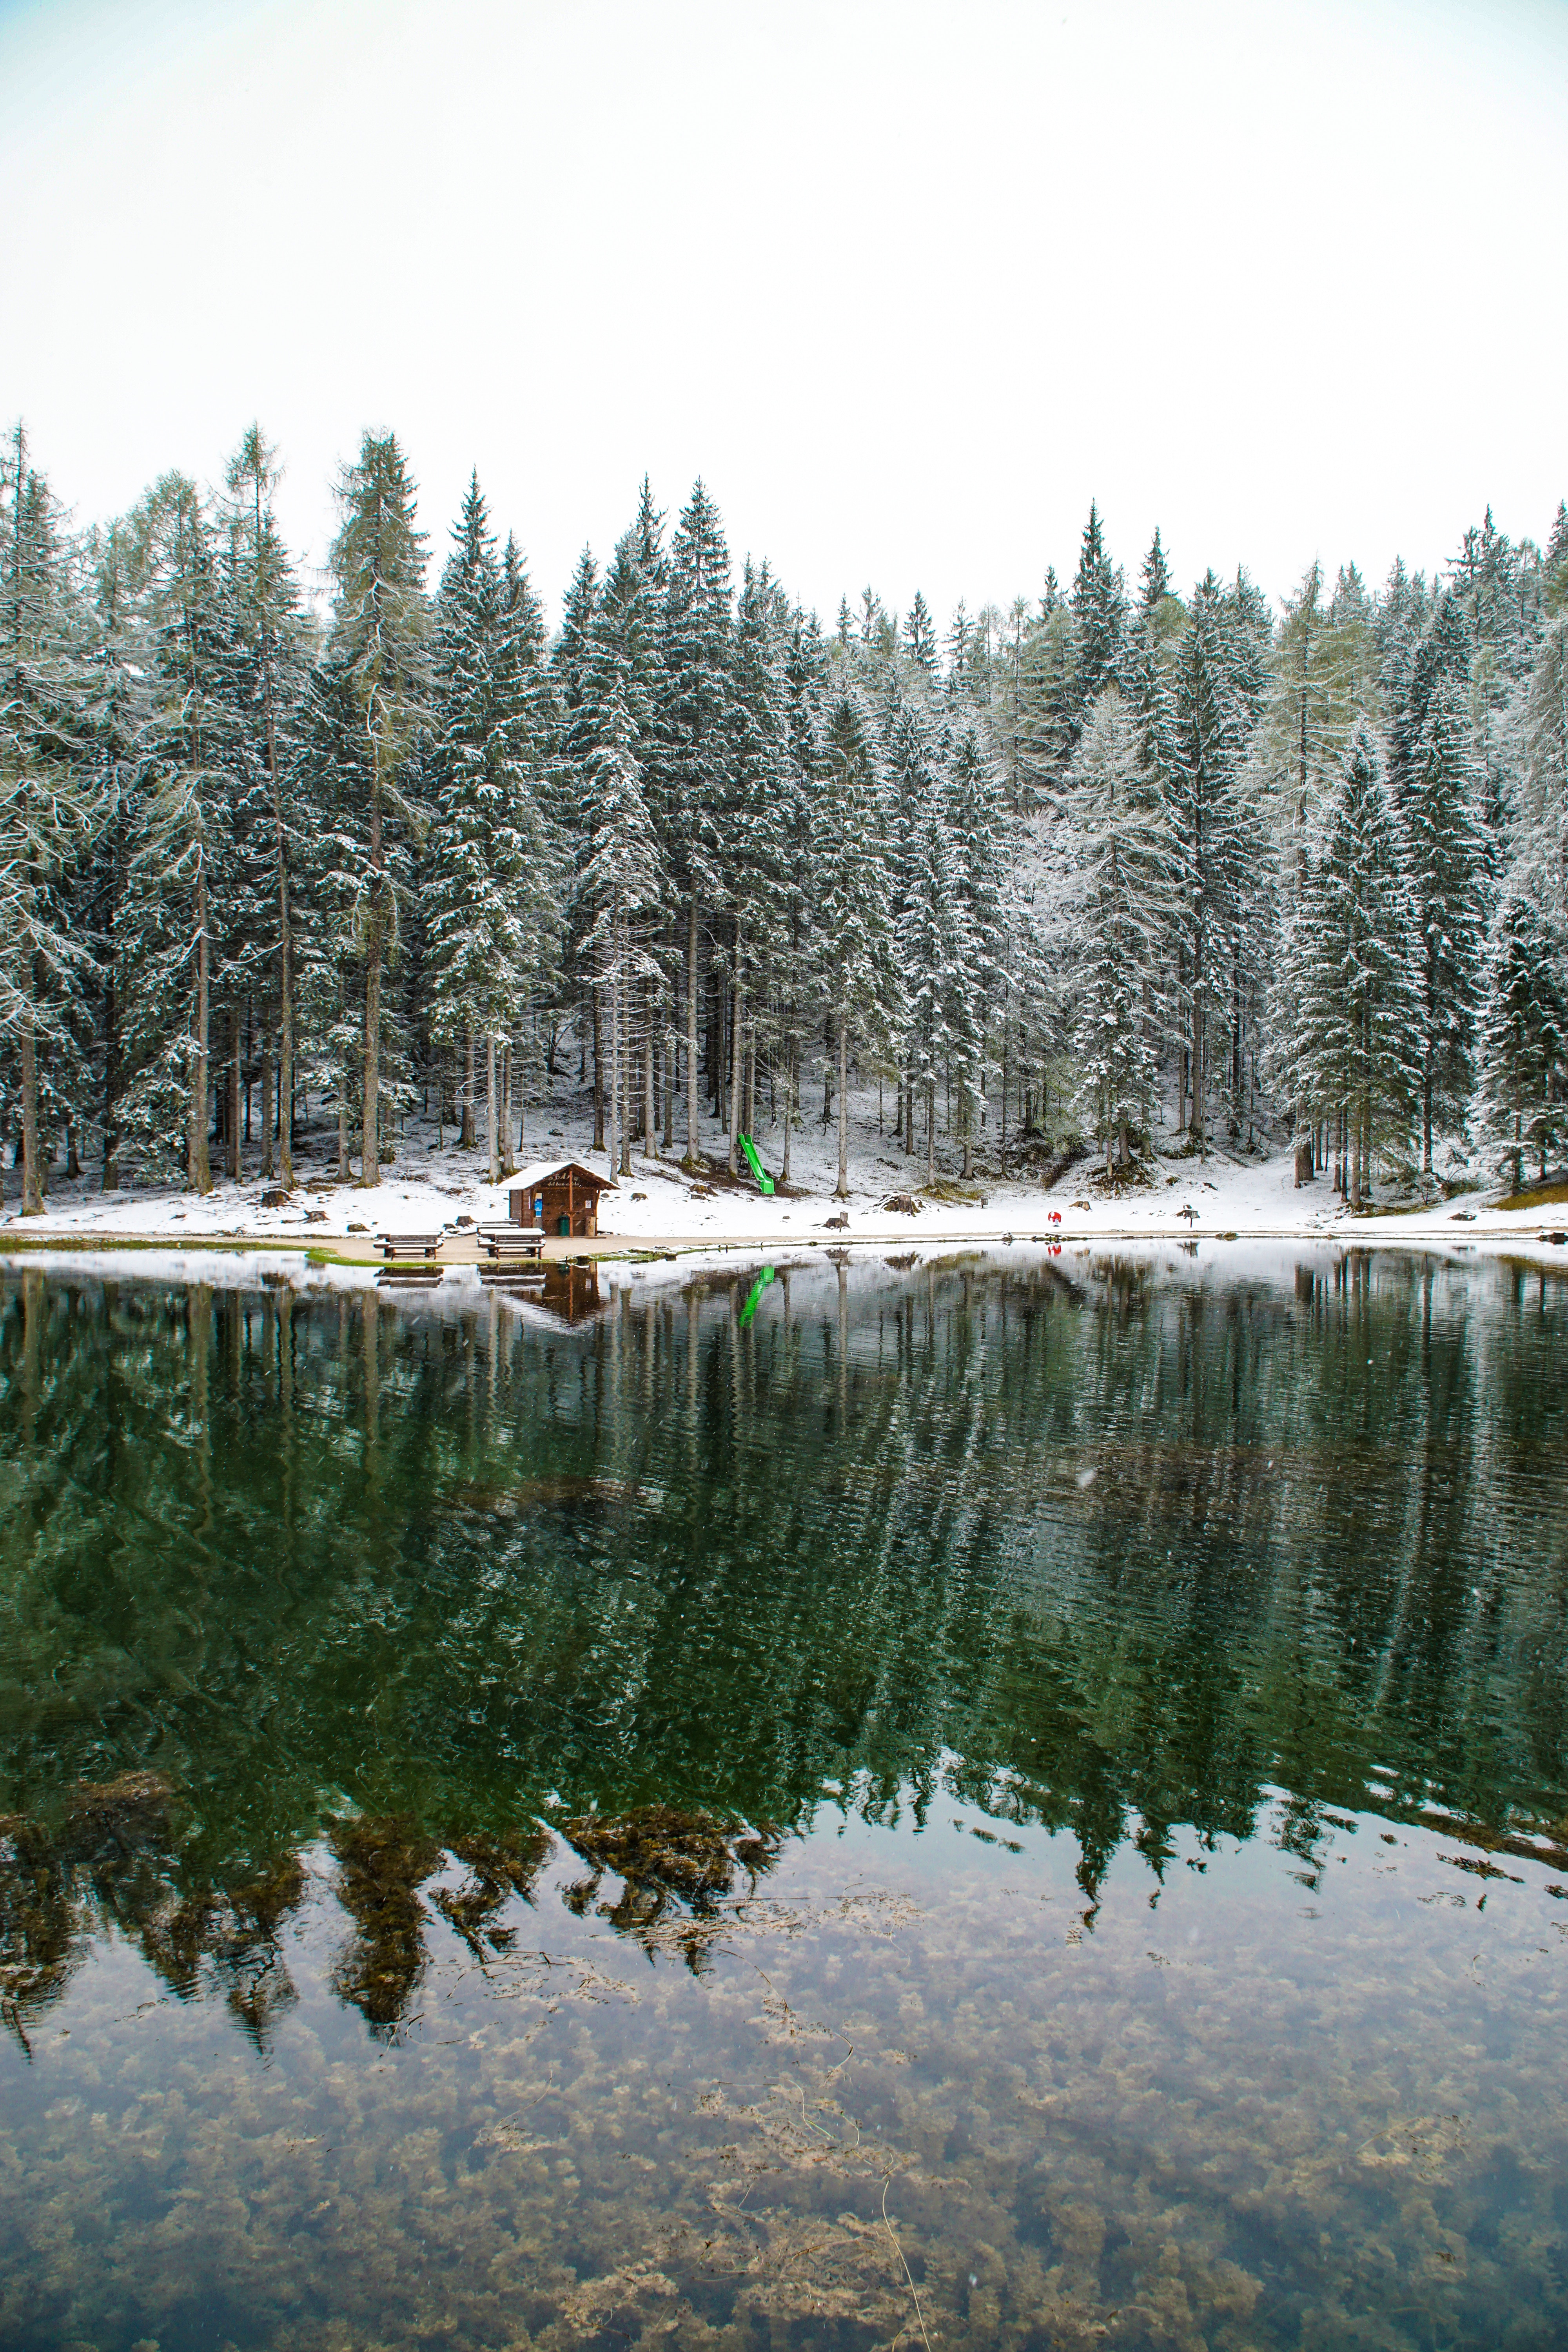 snow, small house, landscape, nature, lake, privacy, seclusion, forest, lodge 1080p